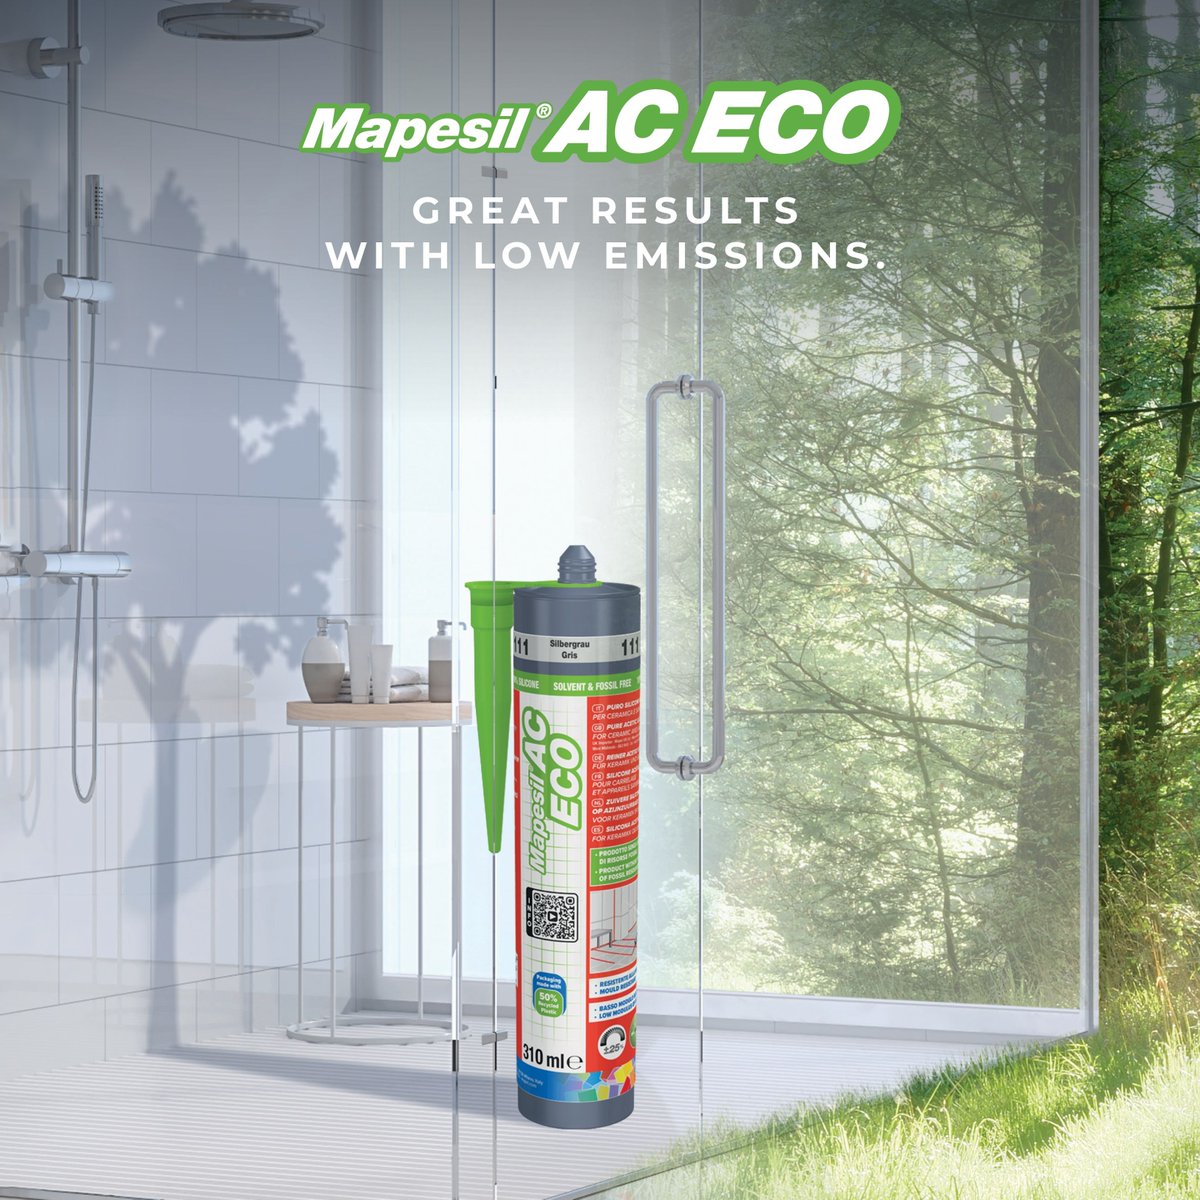 Mapesil AC #Eco is an acetic-crosslinking #silicone #sealant suitable for sealing #glass, #ceramic and #stainless #metals. buff.ly/43KGCN1 #tiling #tiles #tiler #trade #DIY #SiliconeSealant #EcoFriendly #sustainable #sustainability #SustainableConstruction #design